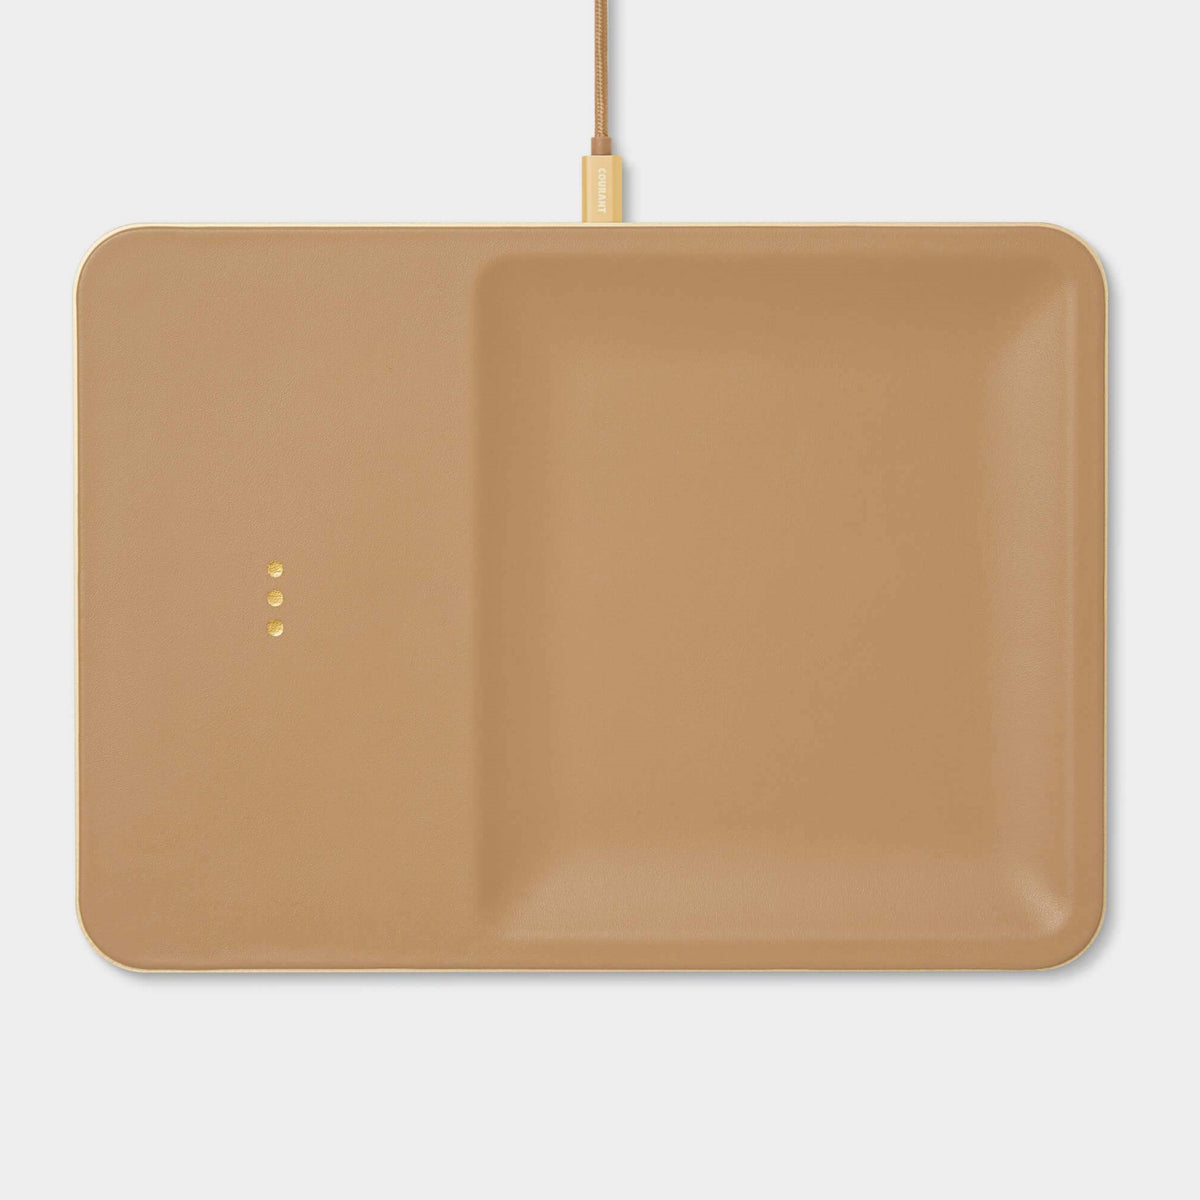 Catch 3 - Fast Wireless Phone Charger in Cortado